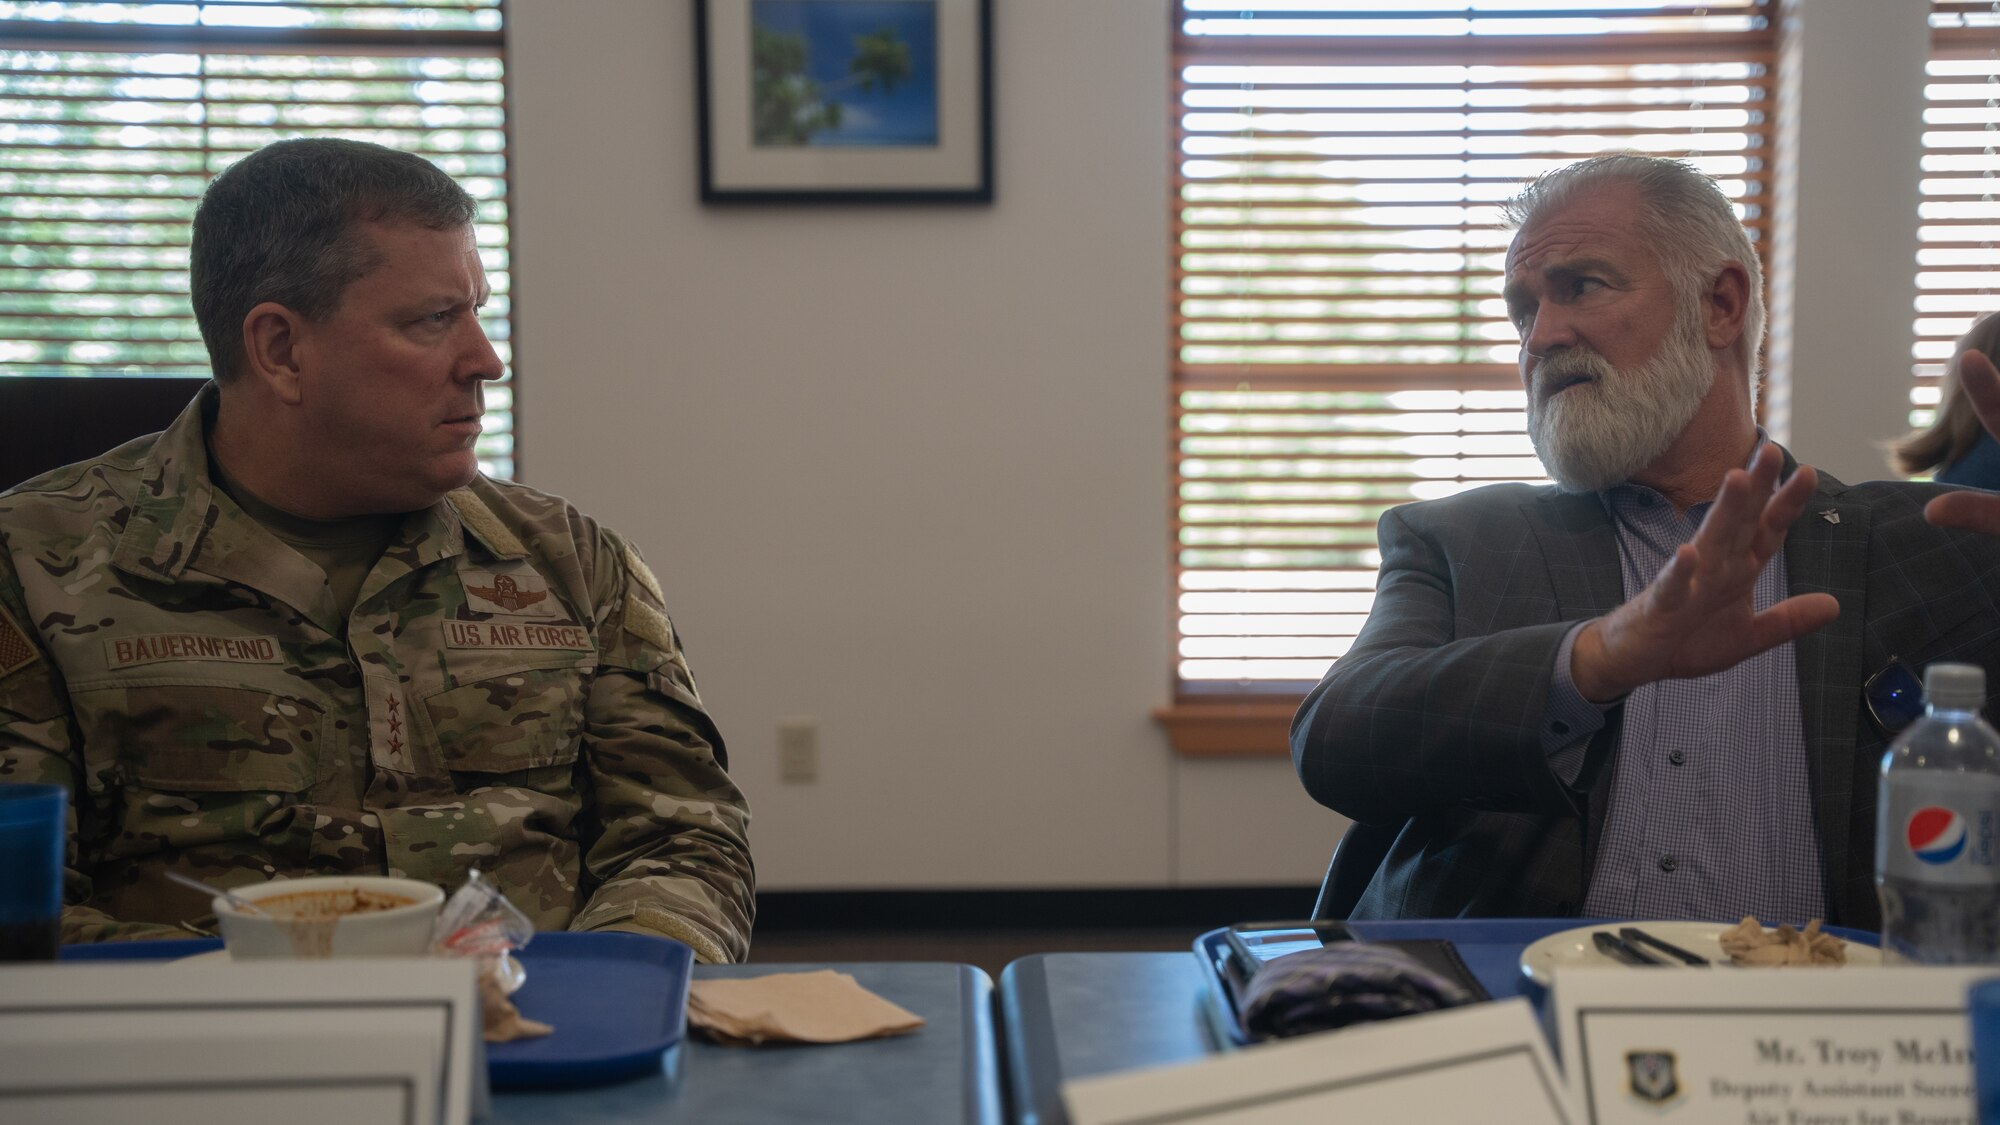 Air Force senior leaders discuss medical challenges at Cannon Air Force Base.